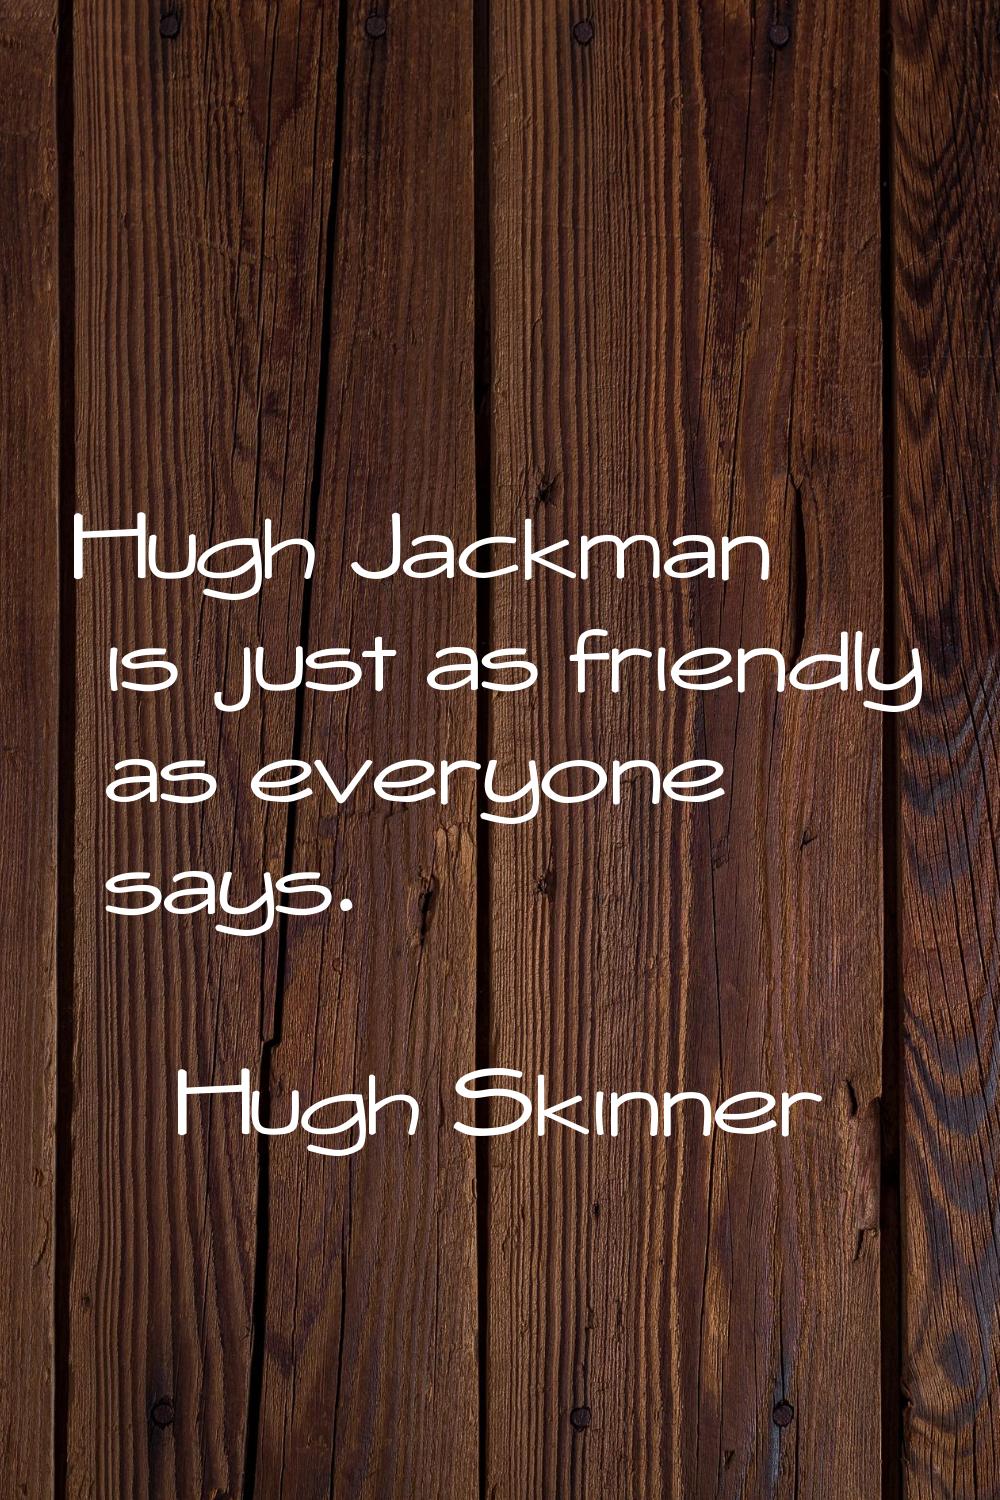 Hugh Jackman is just as friendly as everyone says.